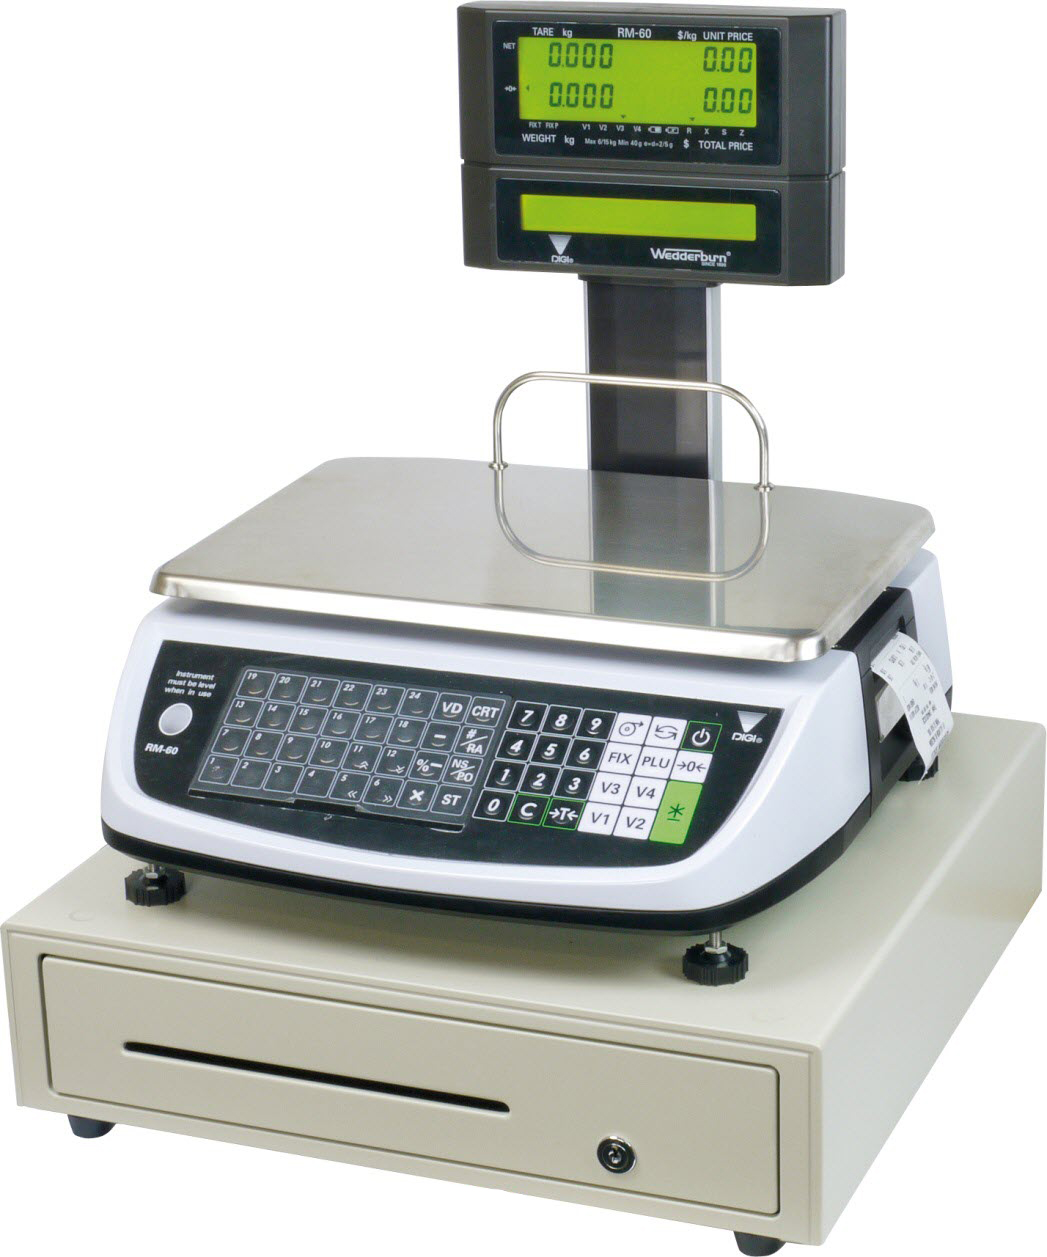 RM60 Receipt Printing Scale